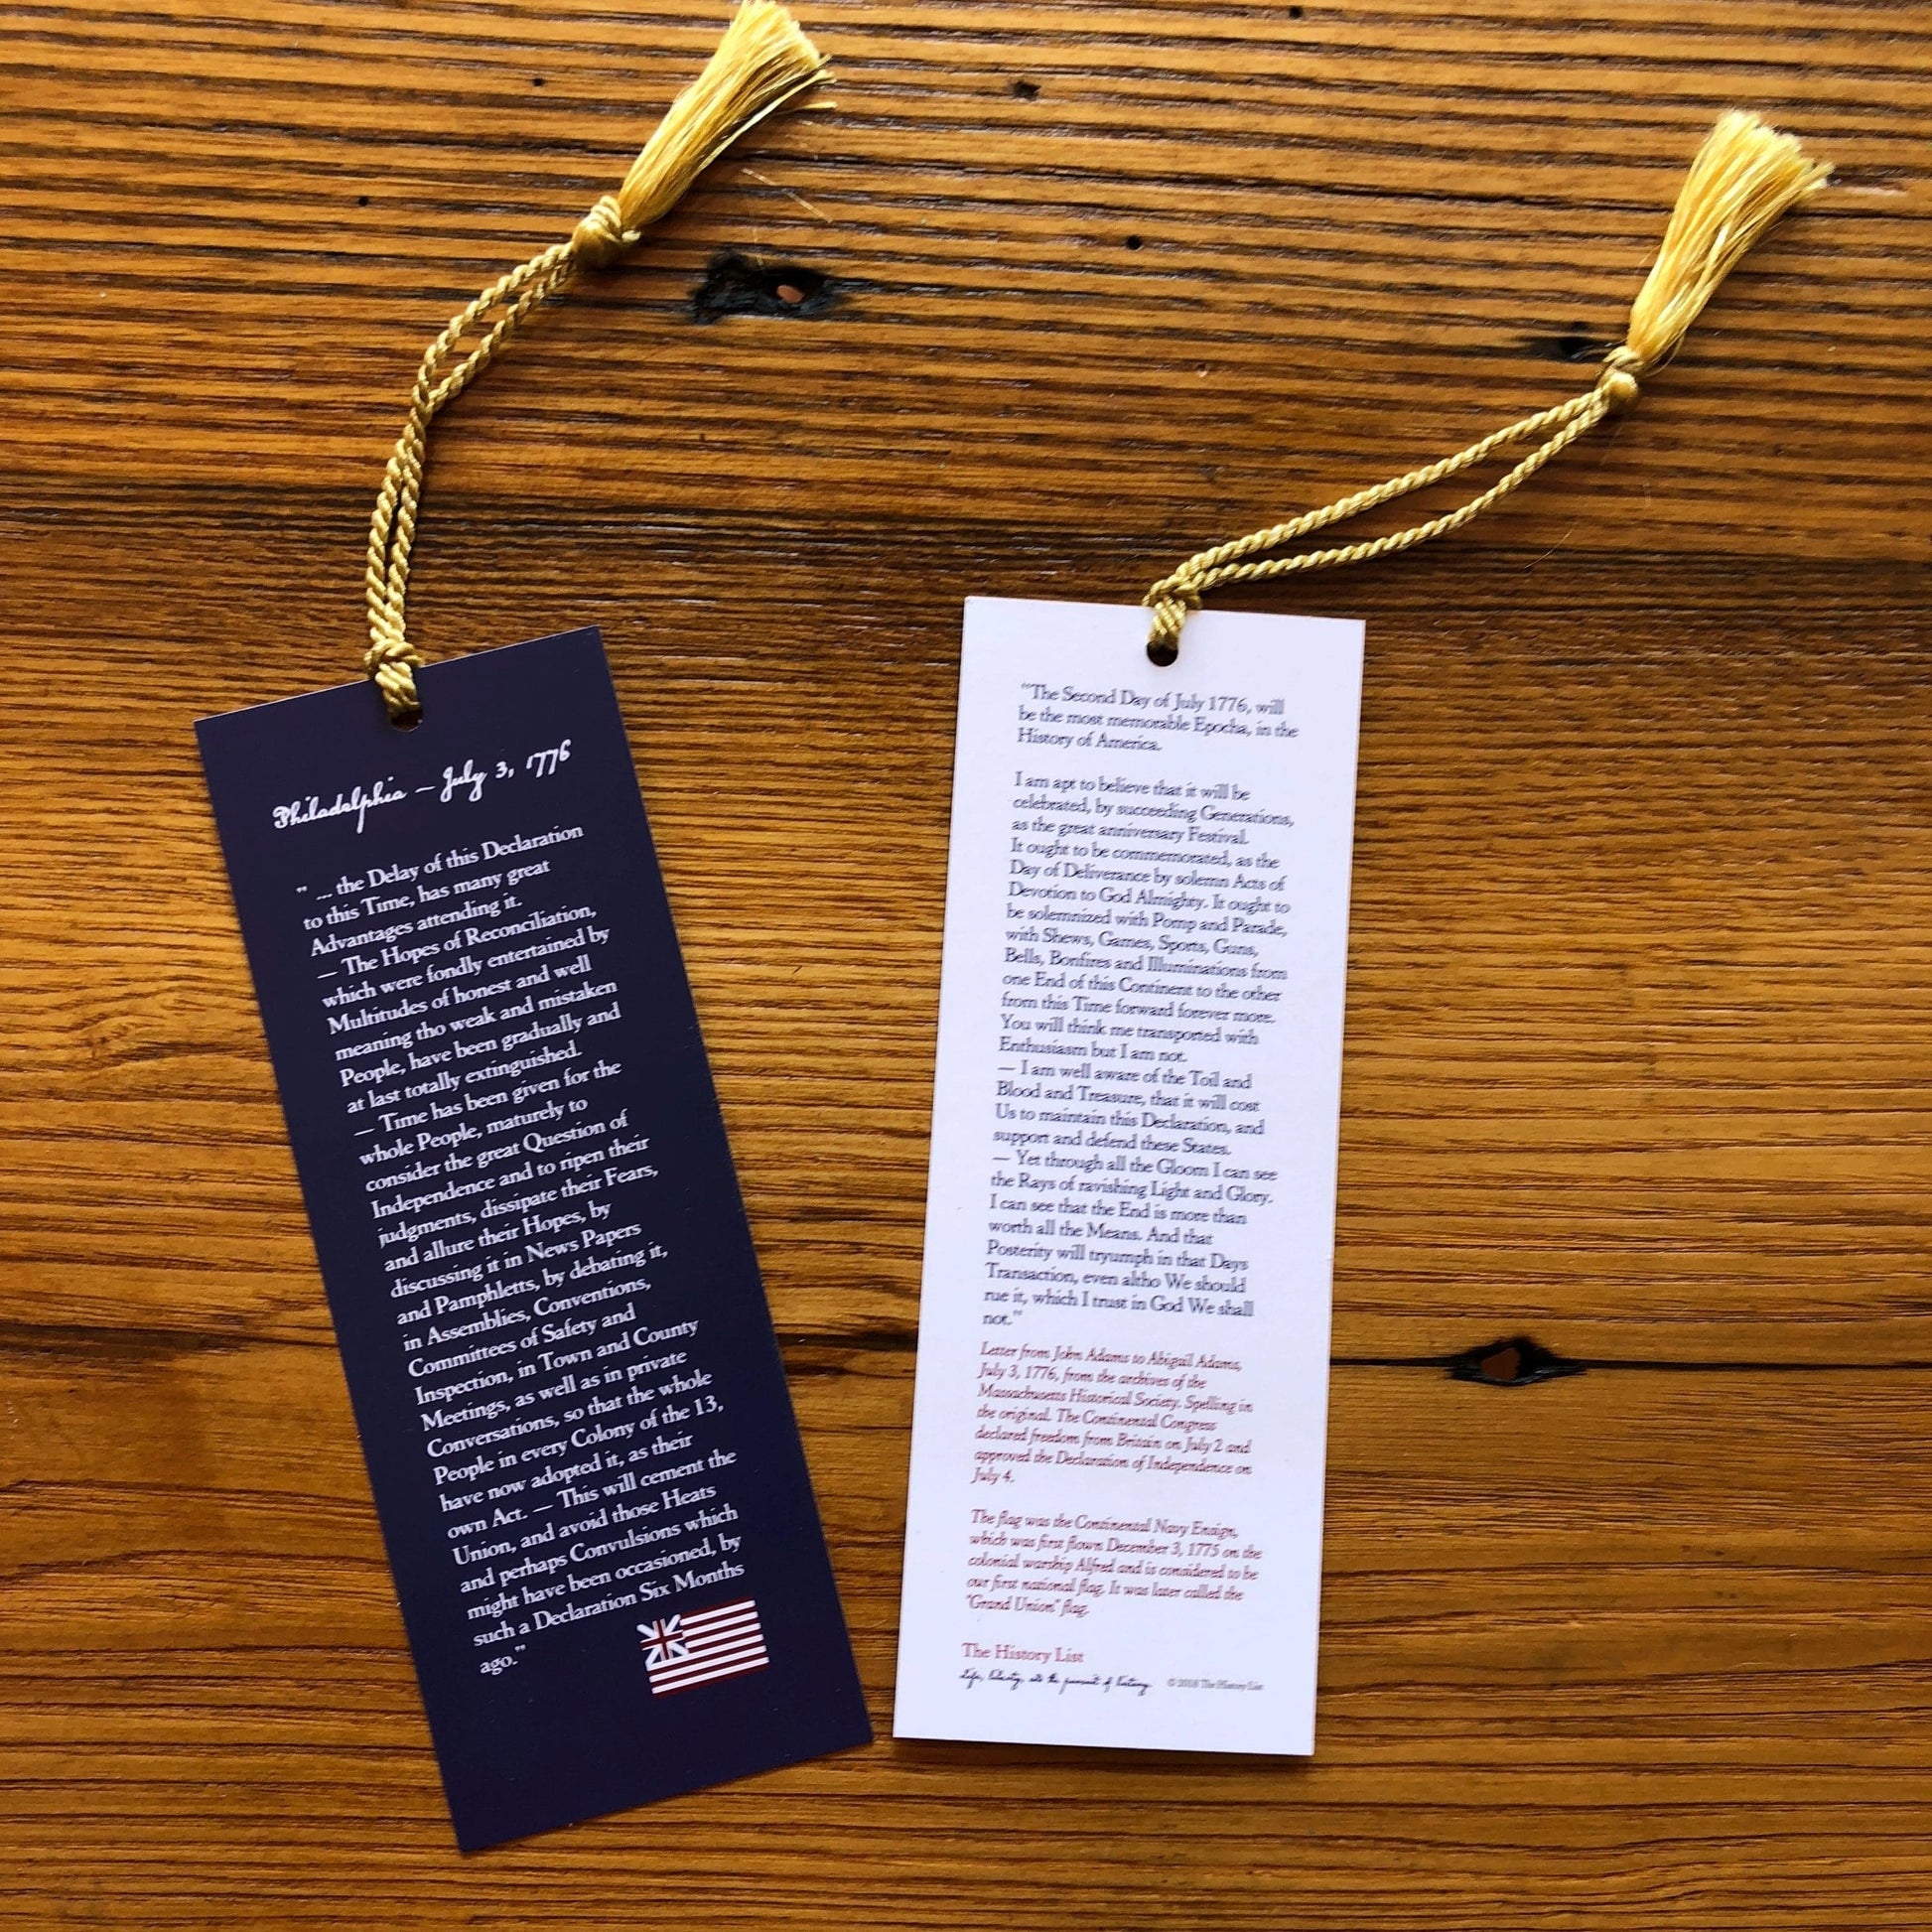 "We hold these truths - July 4, 1776” Bookmark with tassel from The History List store